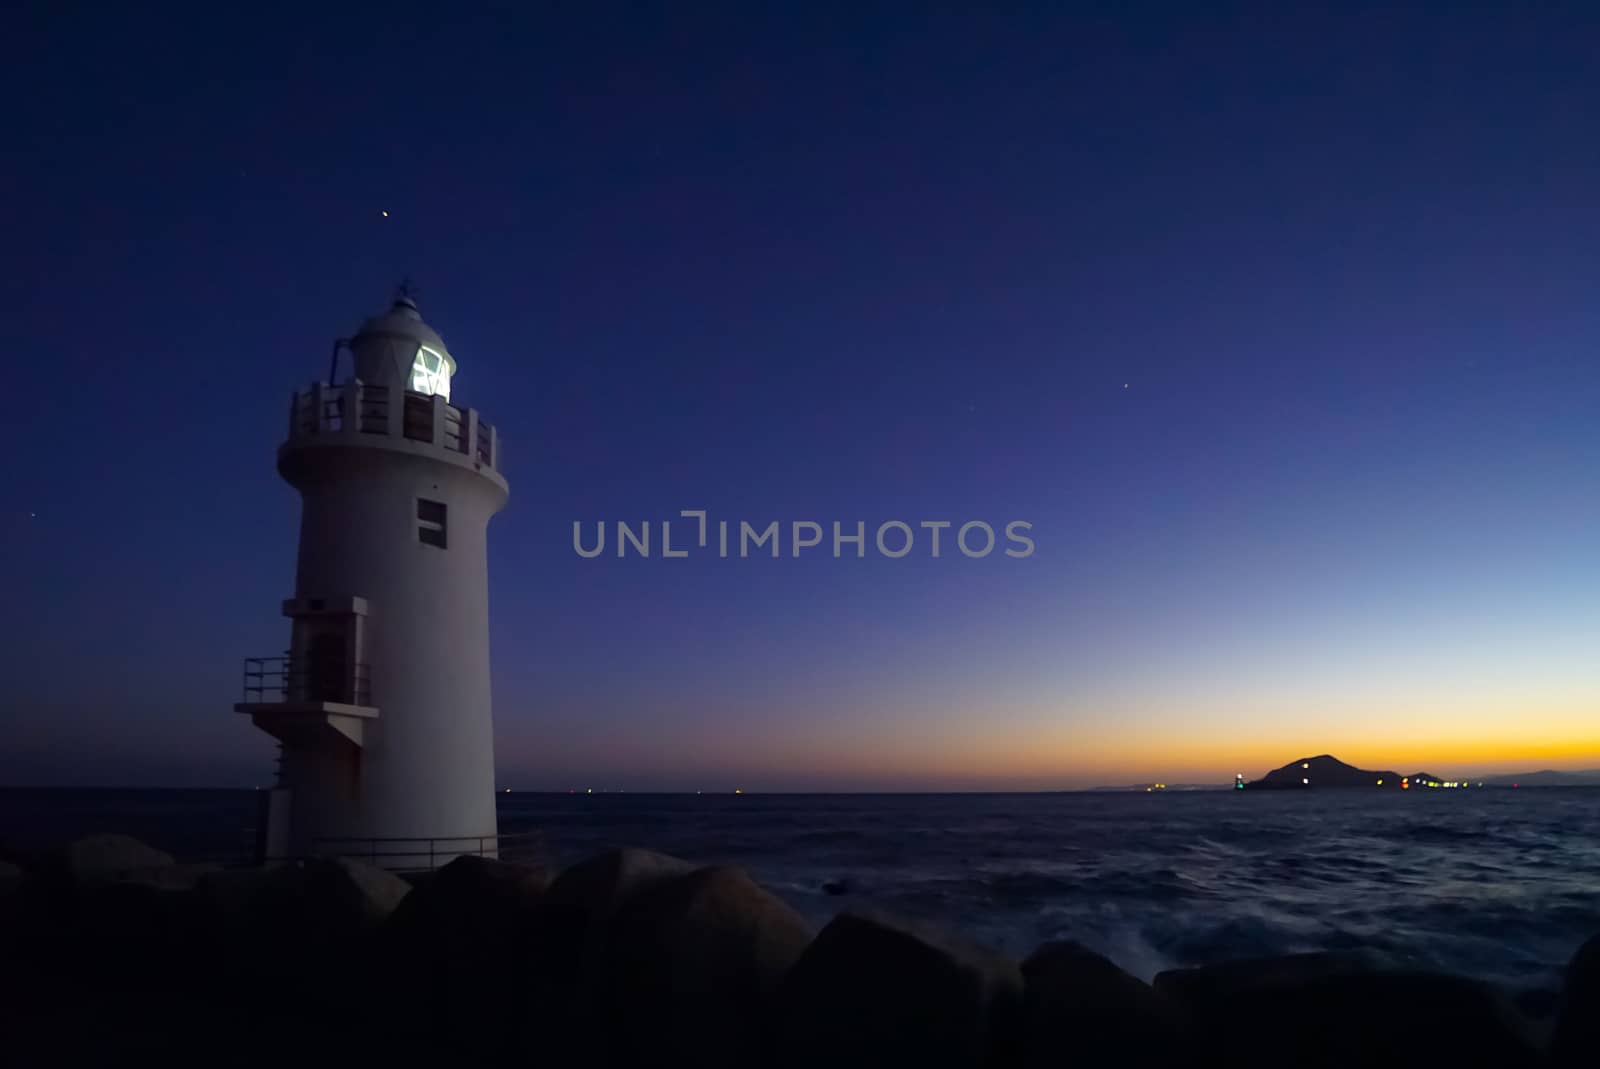 A beautiful night sky behind a White Lighthouse.